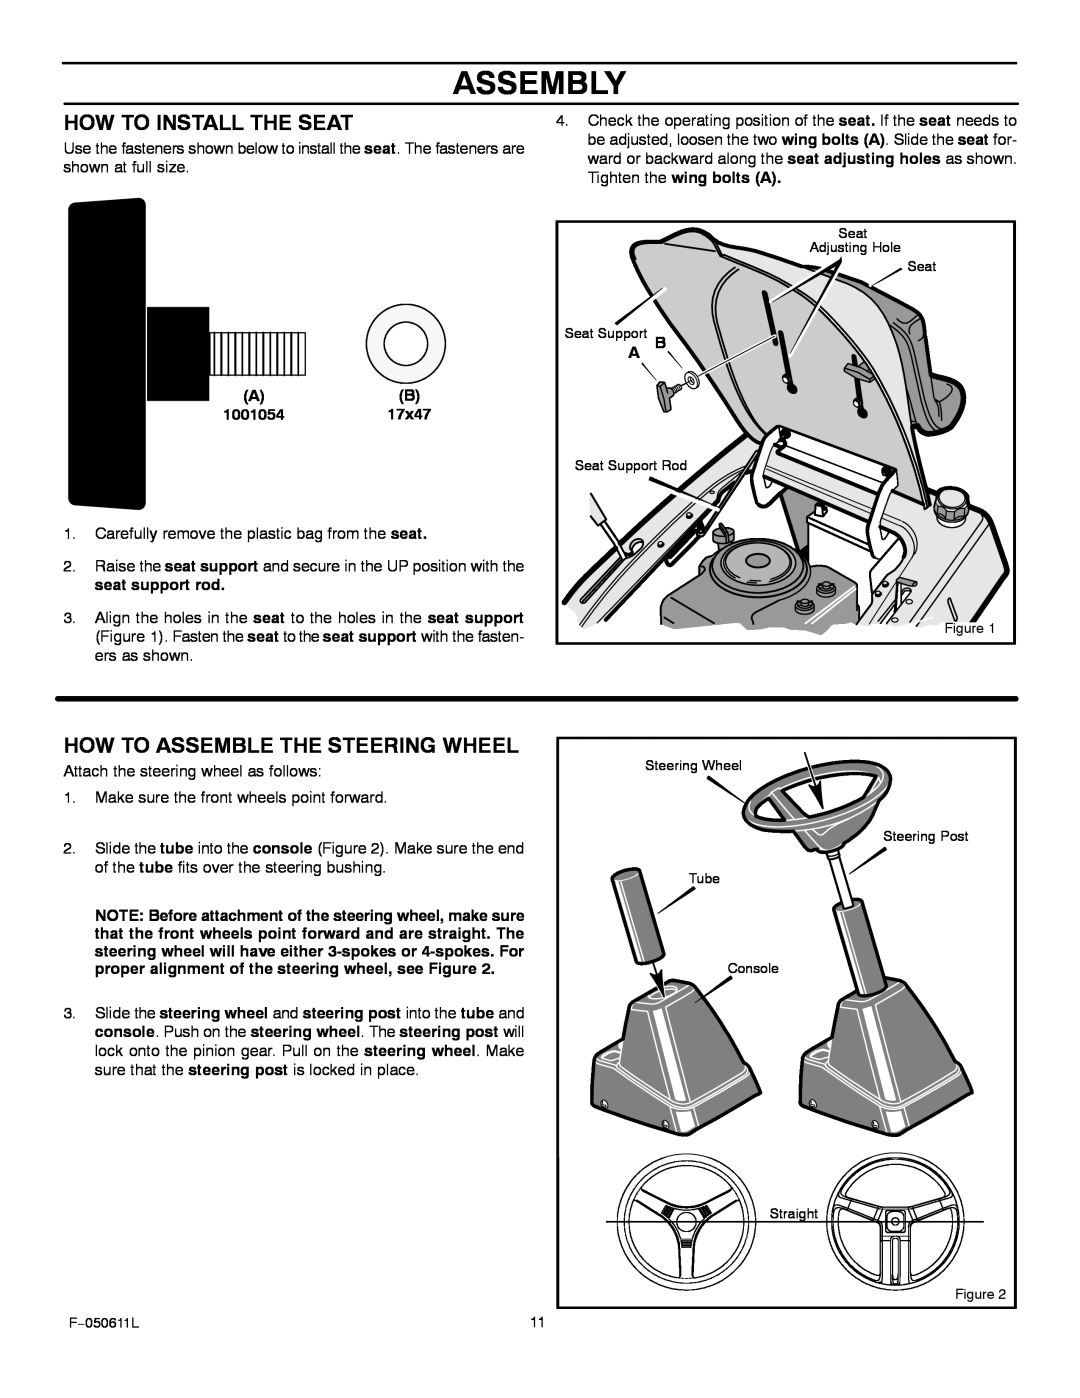 Murray 309007x8B manual How To Install The Seat, How To Assemble The Steering Wheel, Assembly 